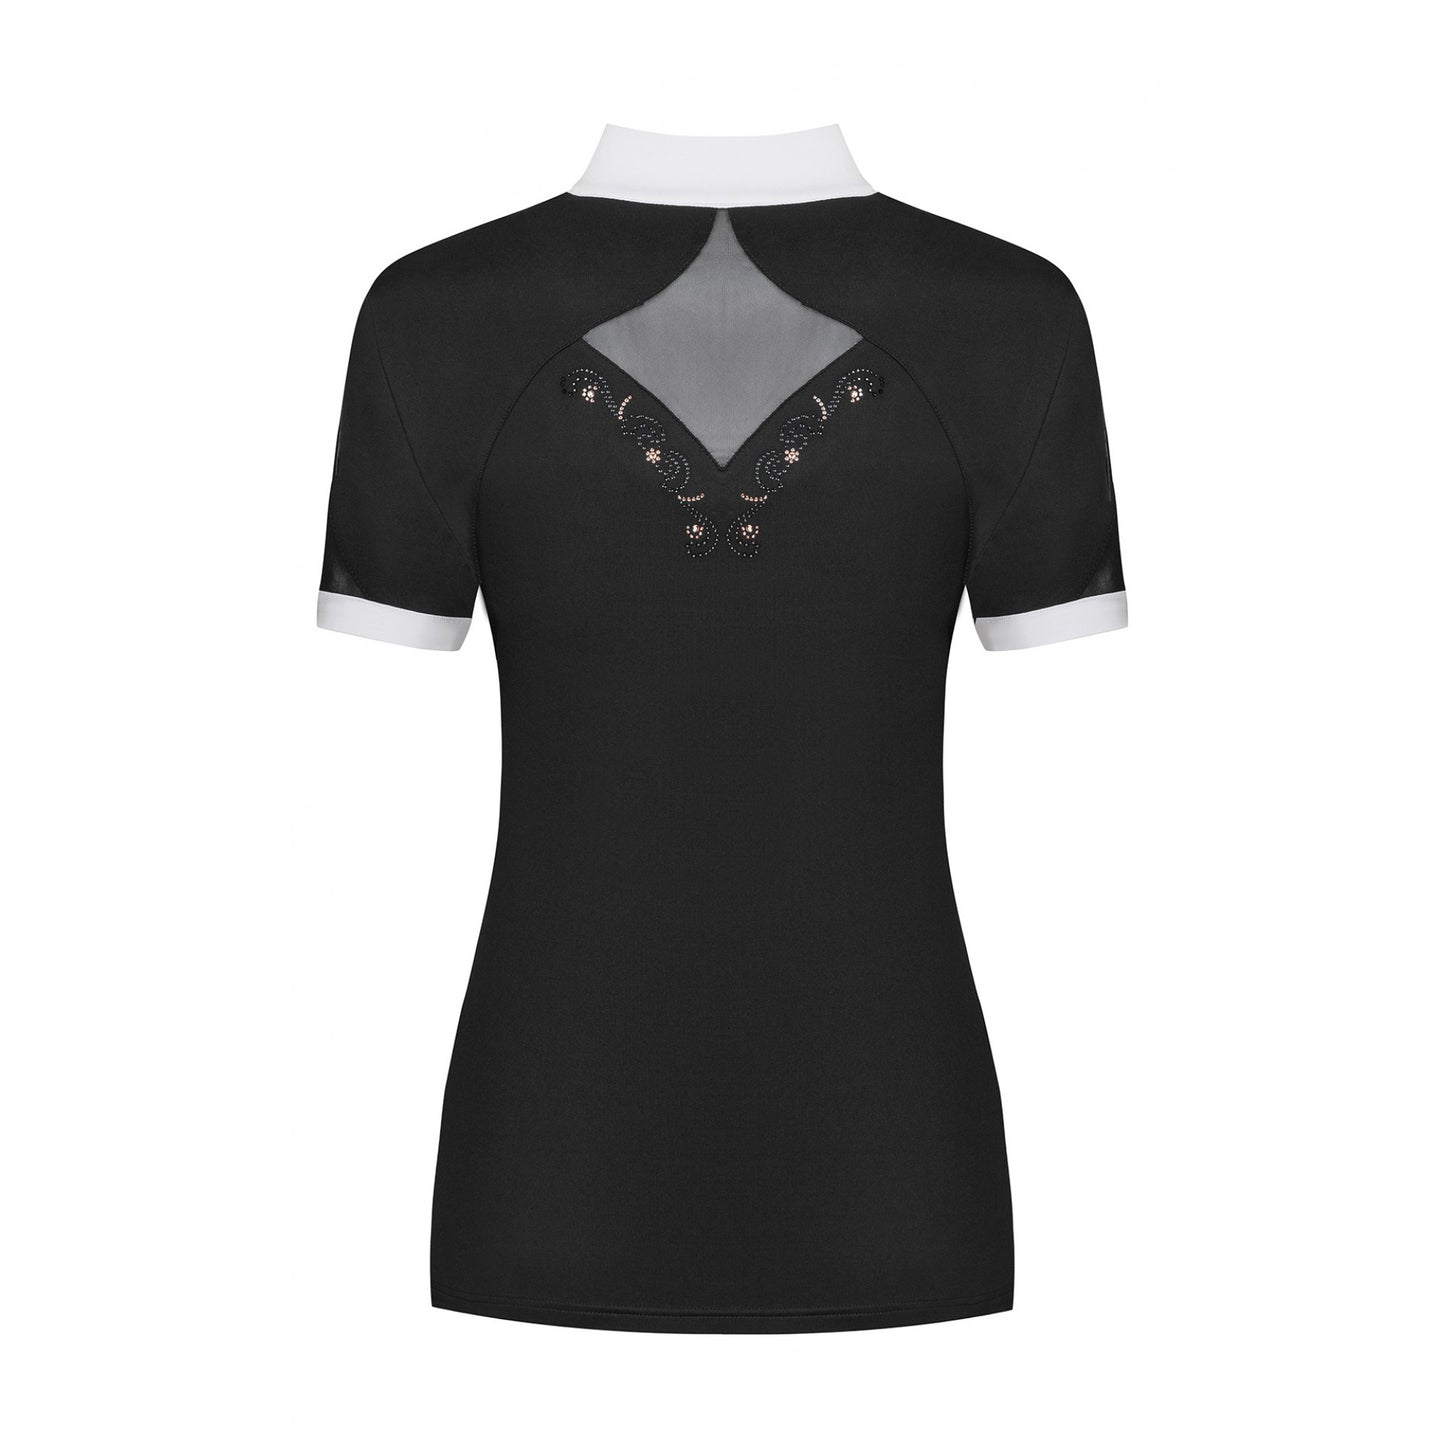 Fairplay Catherine Rose Gold show shirt